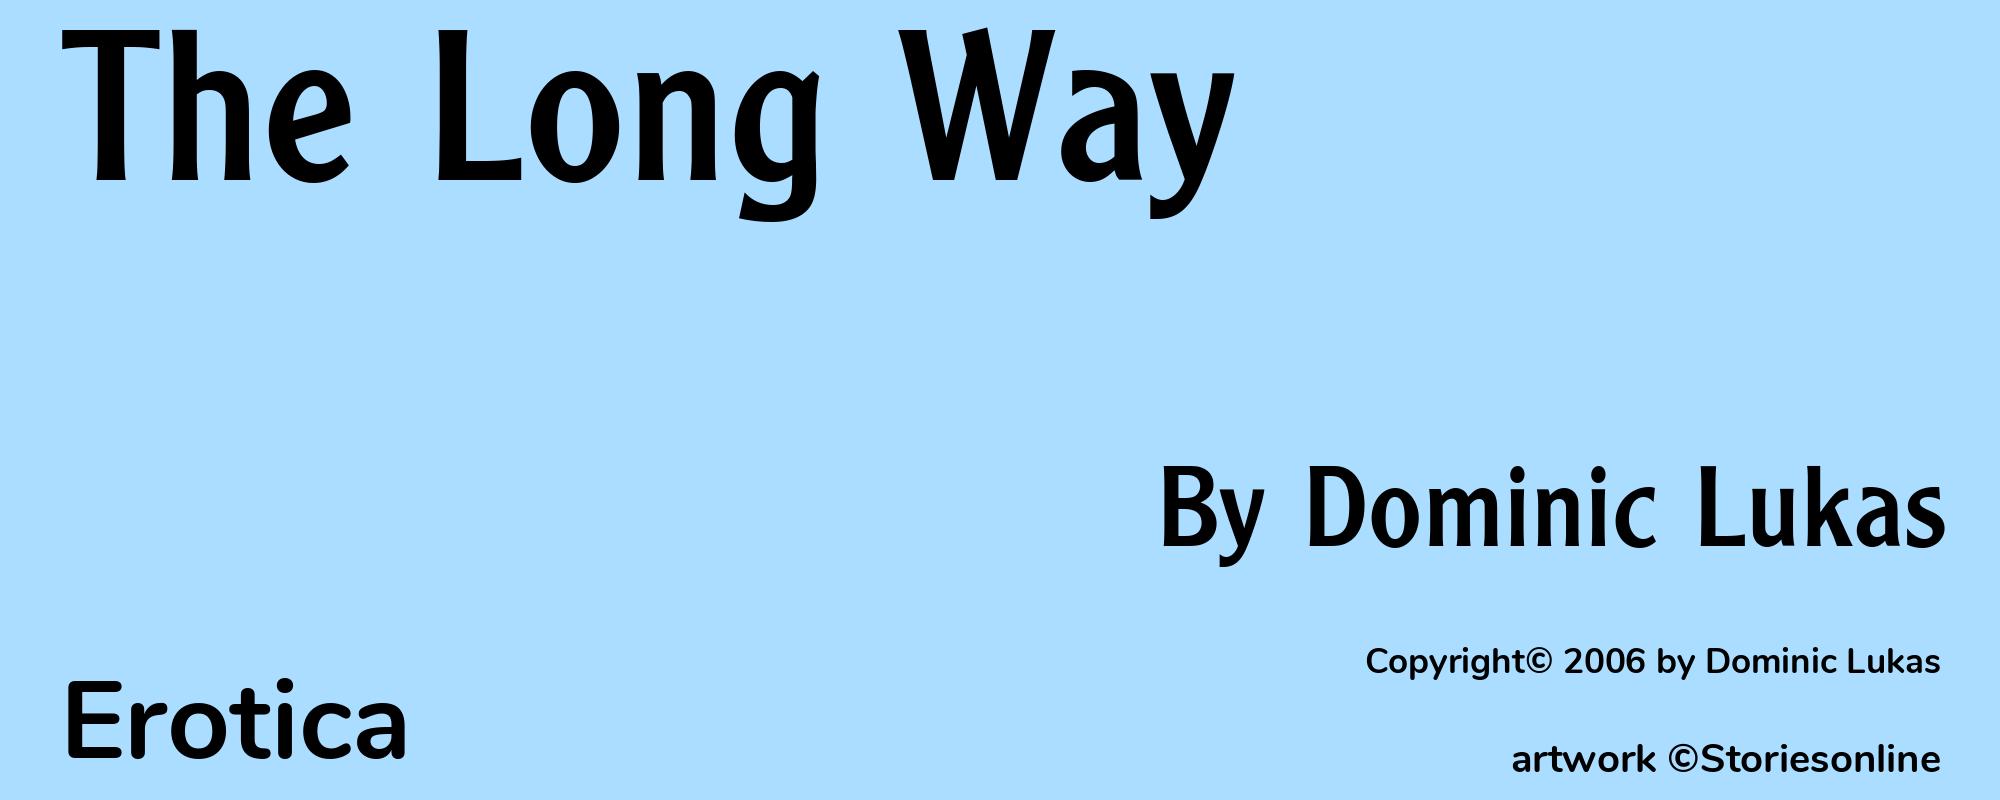 The Long Way - Cover